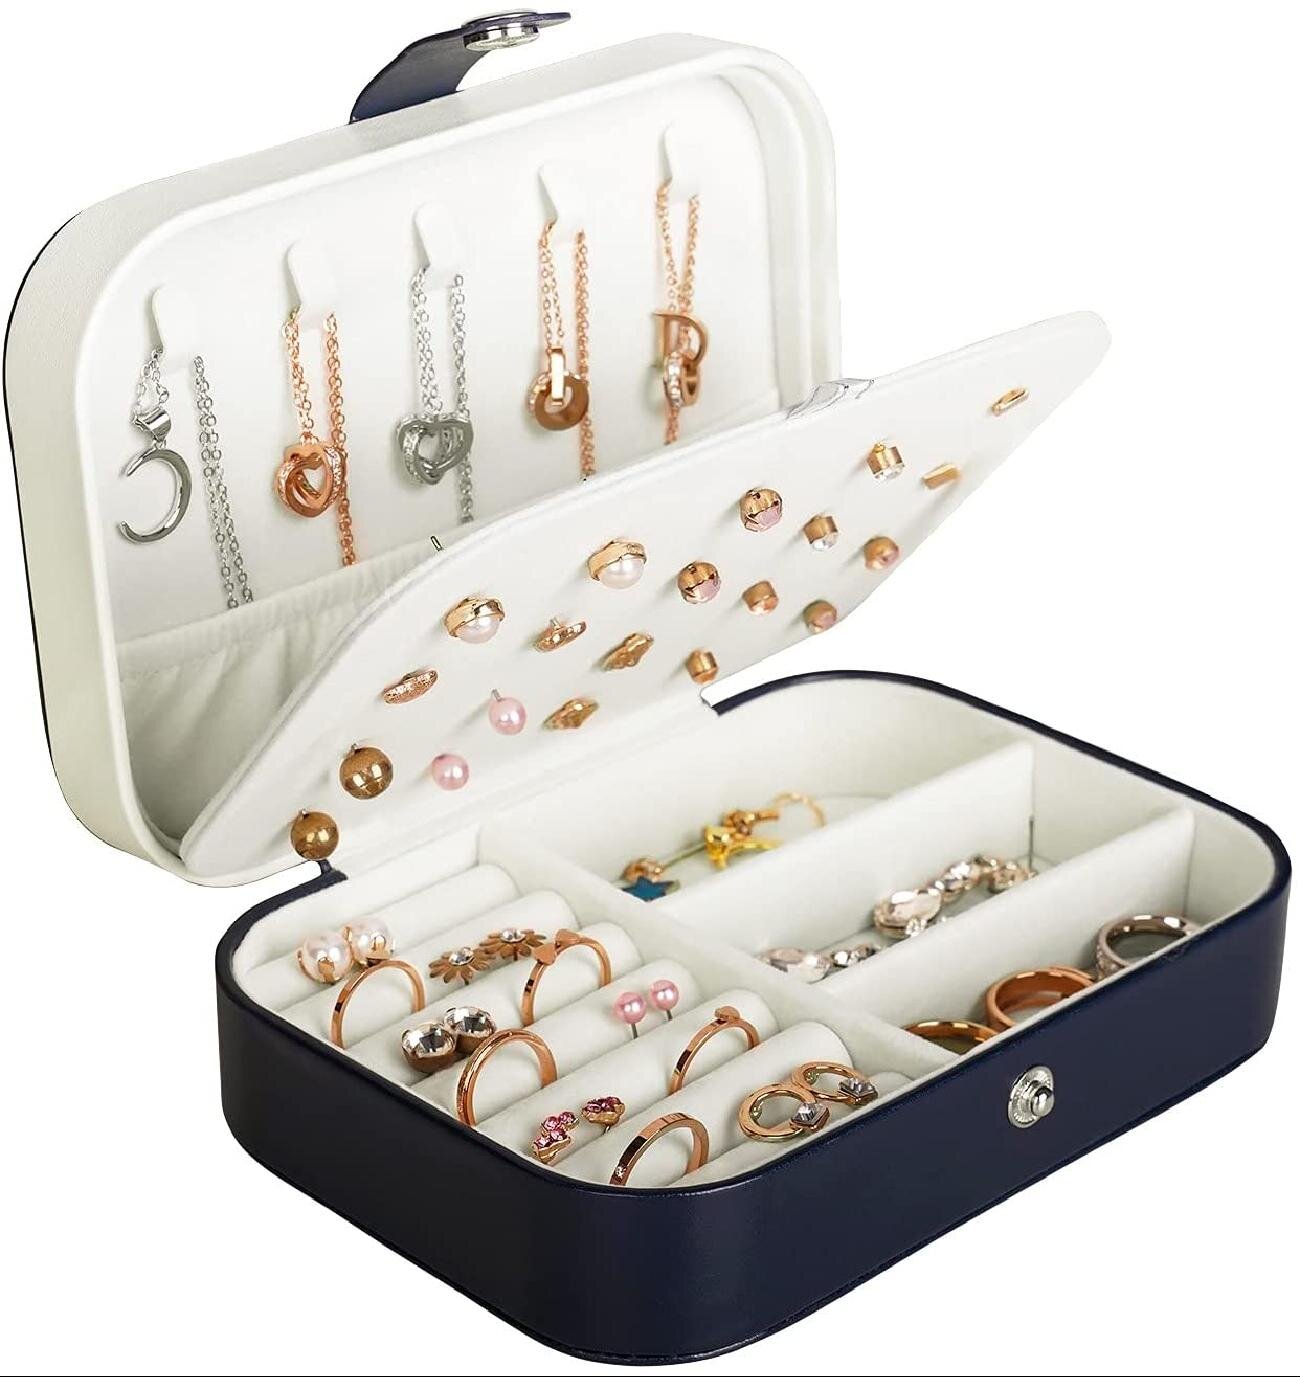 Jewelry Box Trave Jewelry Organiser Jewelry Case Storage Holder for Rings Earrings Necklace Bracelets Premium PU Leather Jewelry Gift Box for Girls Women Pink 